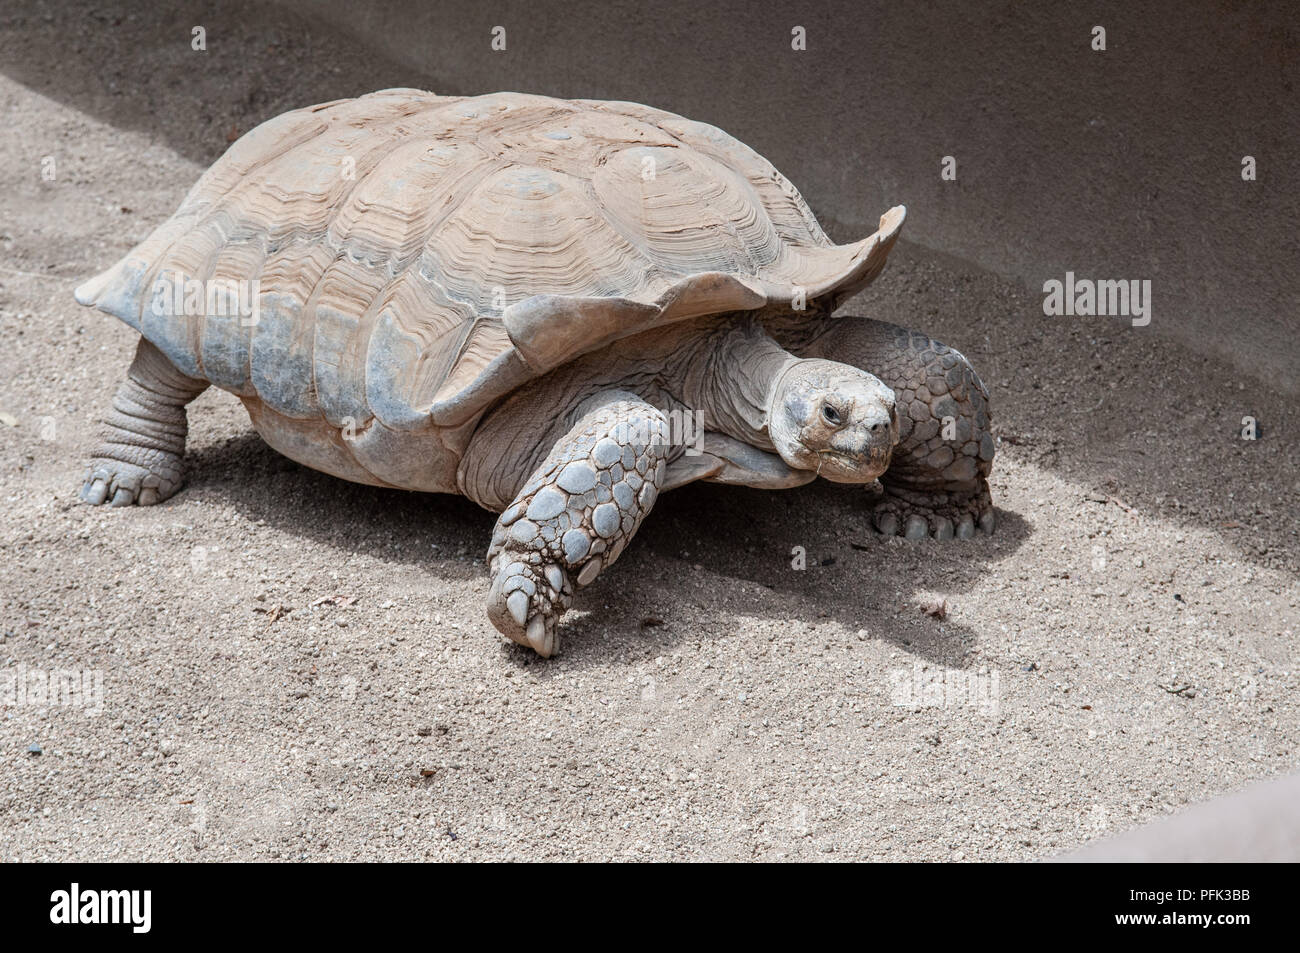 Some of the Zoos oldestand slowestresidents are the Galpagos tortoises. The Galapagos tortoise or Galapagos giant tortoise is a tortoise Stock Photo